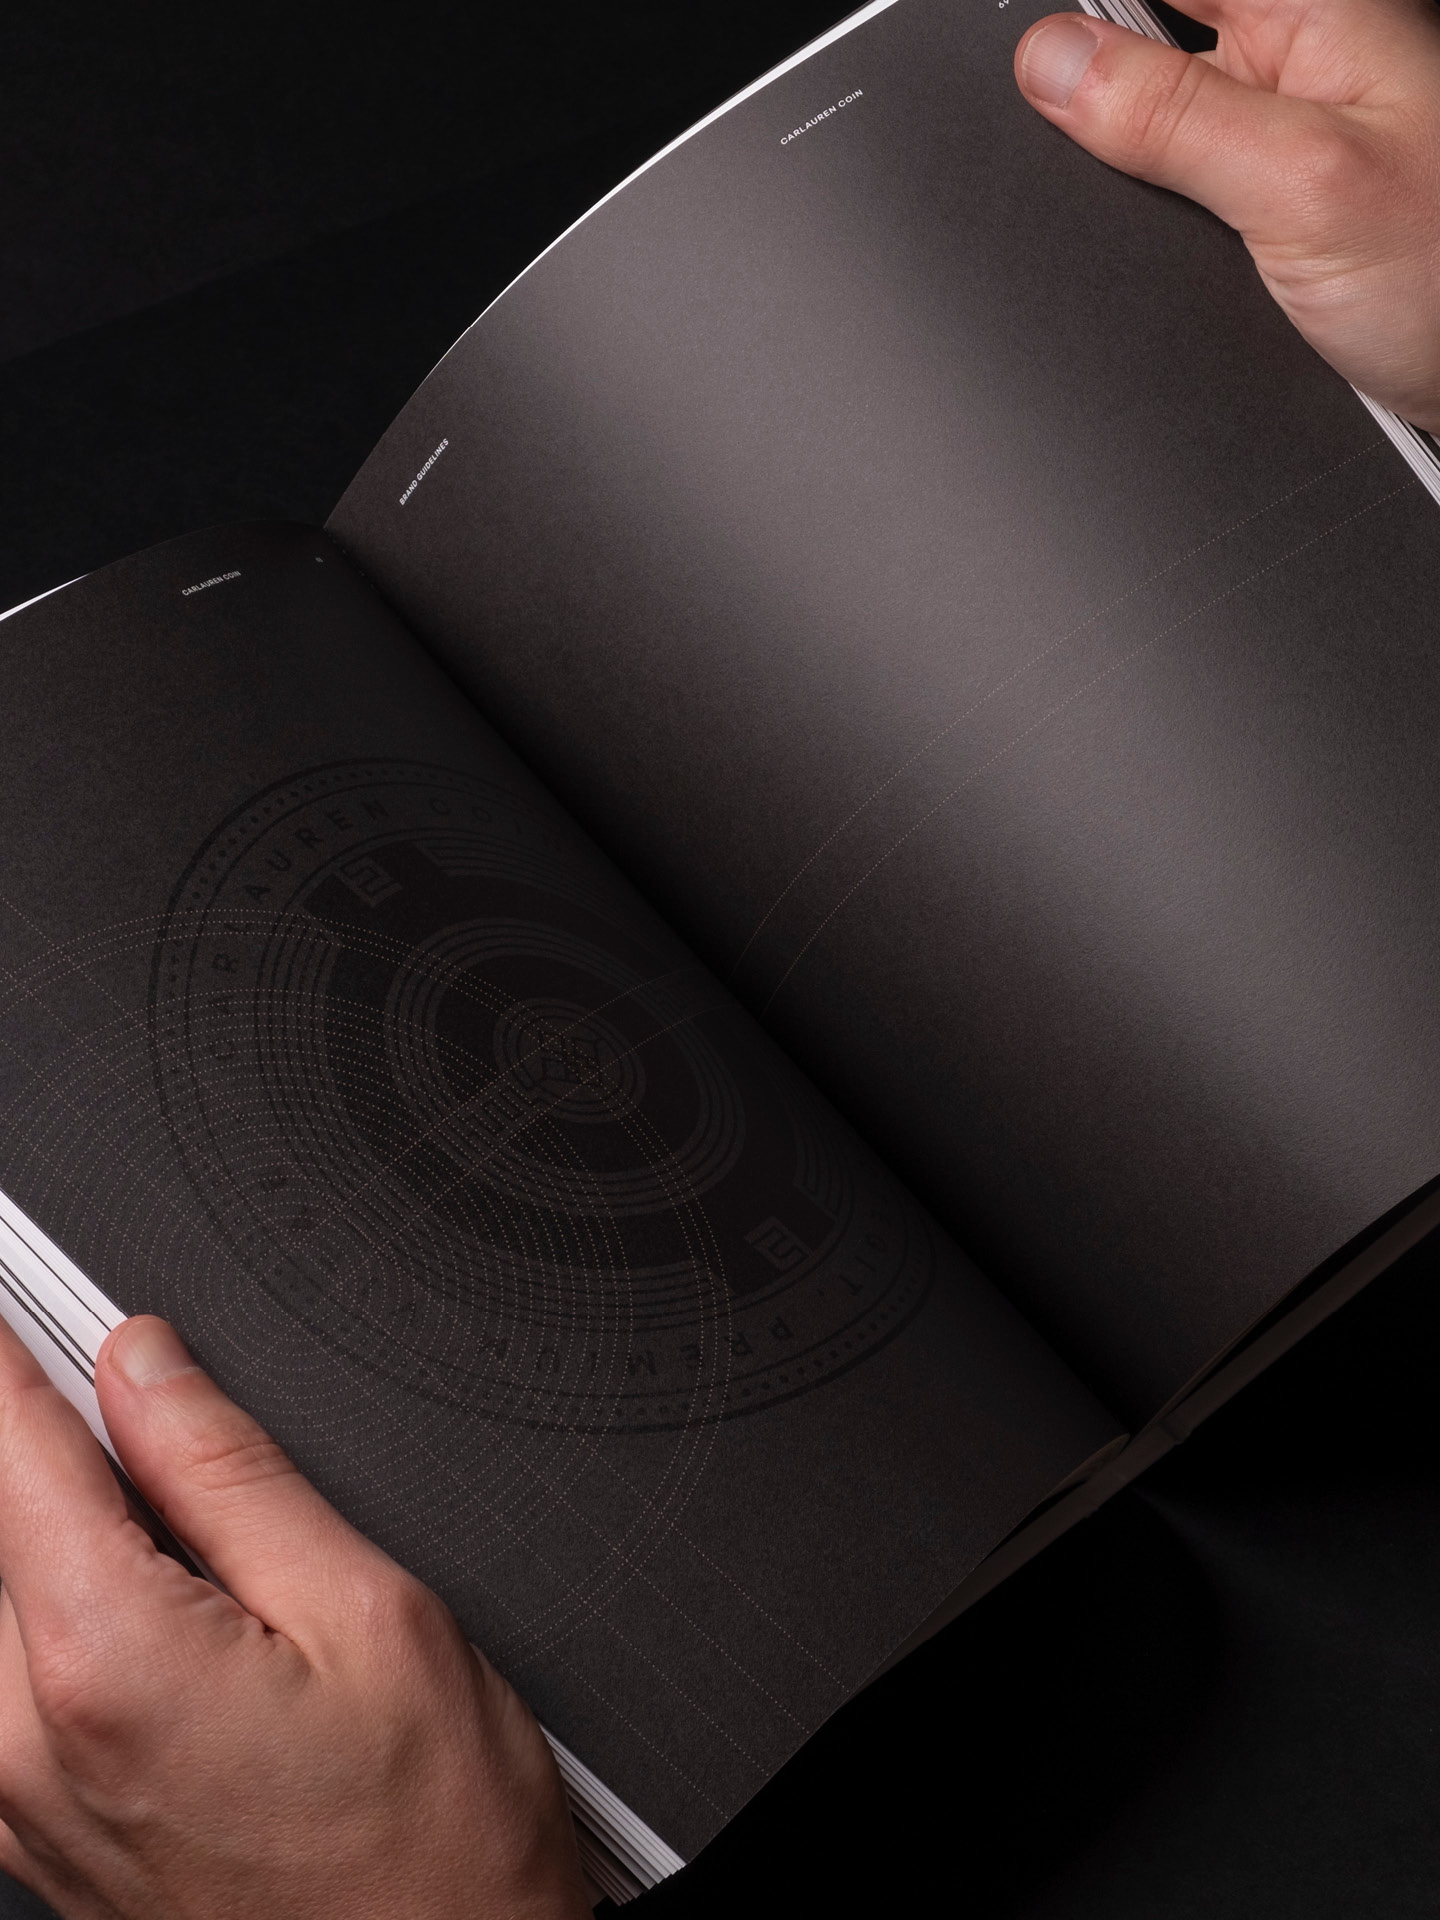 A printed spread from the Carlauren guidelines showing the detail of the Carlauren coin